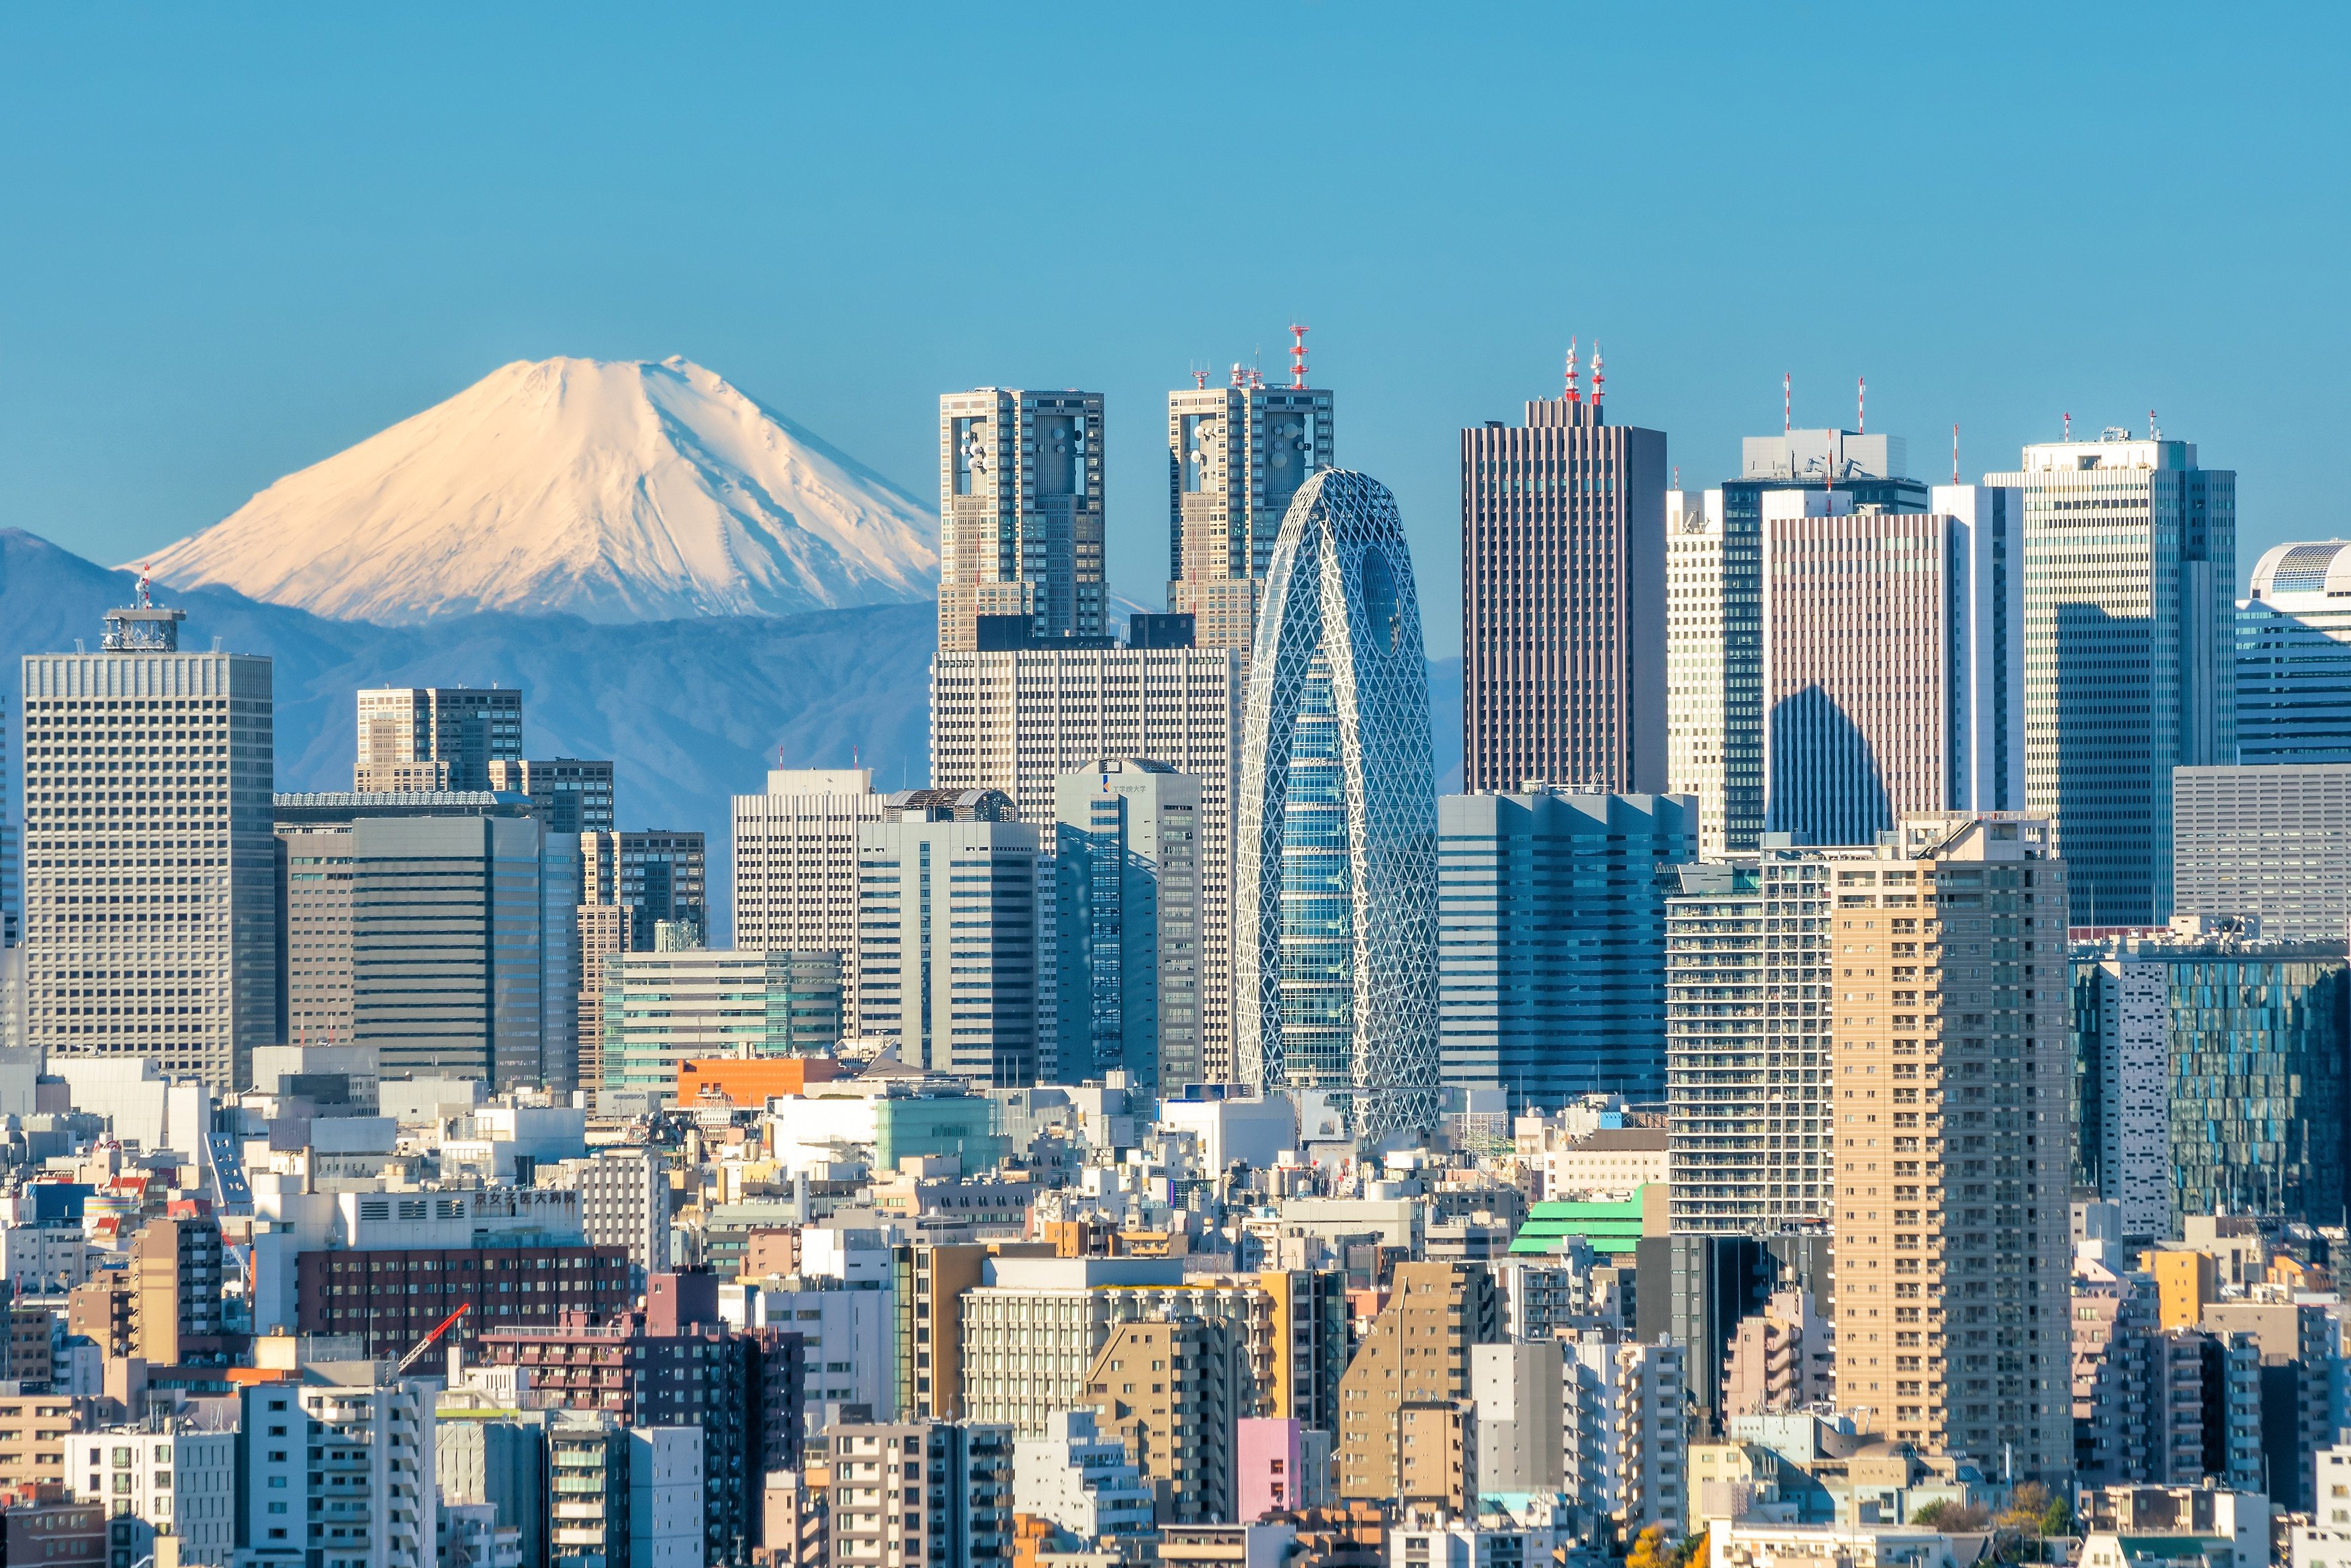 The Tokyo skyline pictured with Mount Fuji in the background. Japanese start-ups are drawing more attention as funding dries up in other markets. Photo: Shutterstock